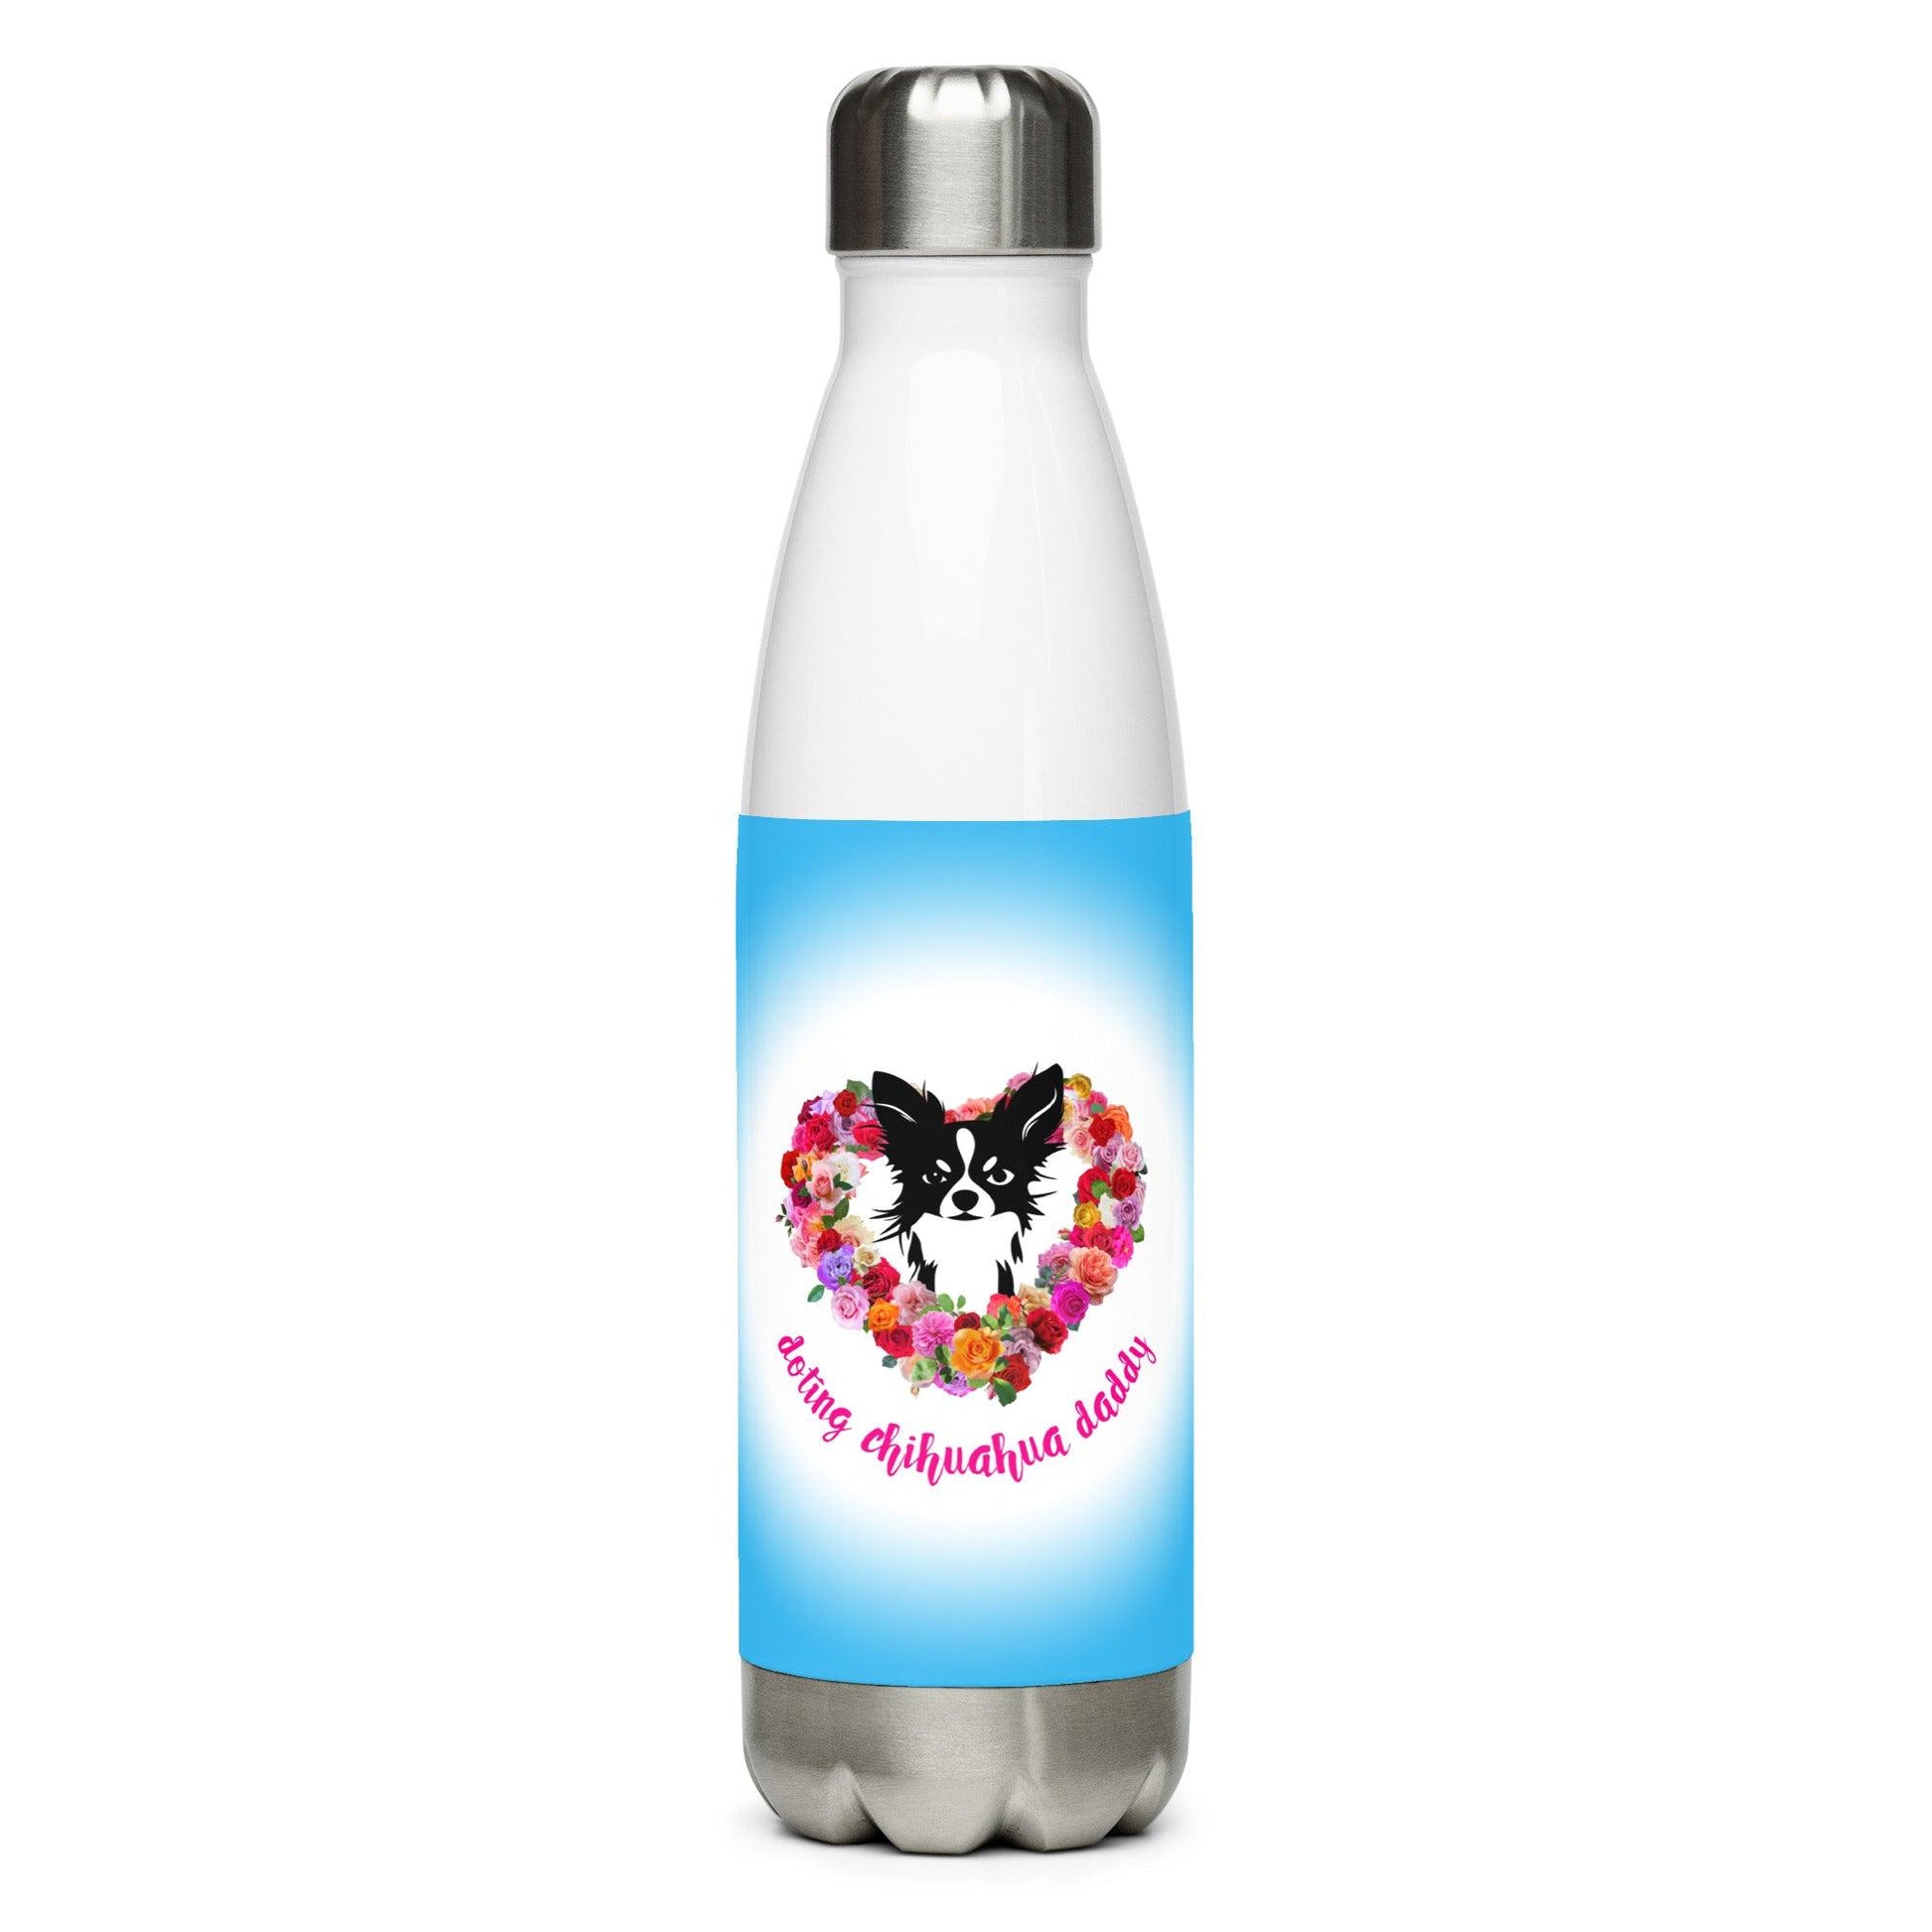 Doting Chihuahua Daddy 500ml double-walled stainless steel vacuum flask / water bottle with leak-proof cap. Keeps drinks hot or cold up to 6 hours. Real men love chihuahuas. Chihuahua daddies are sexy! Forget guns and roses; Chimigos gives you chihuahuas and roses. Divine. Adorable. Slay. SEXY! This chihuahua and roses bottle make the perfect Father's Day / birthday / Christmas gift for a doting chihuahua daddy. Design by Renate Kriegler for Chimigos.